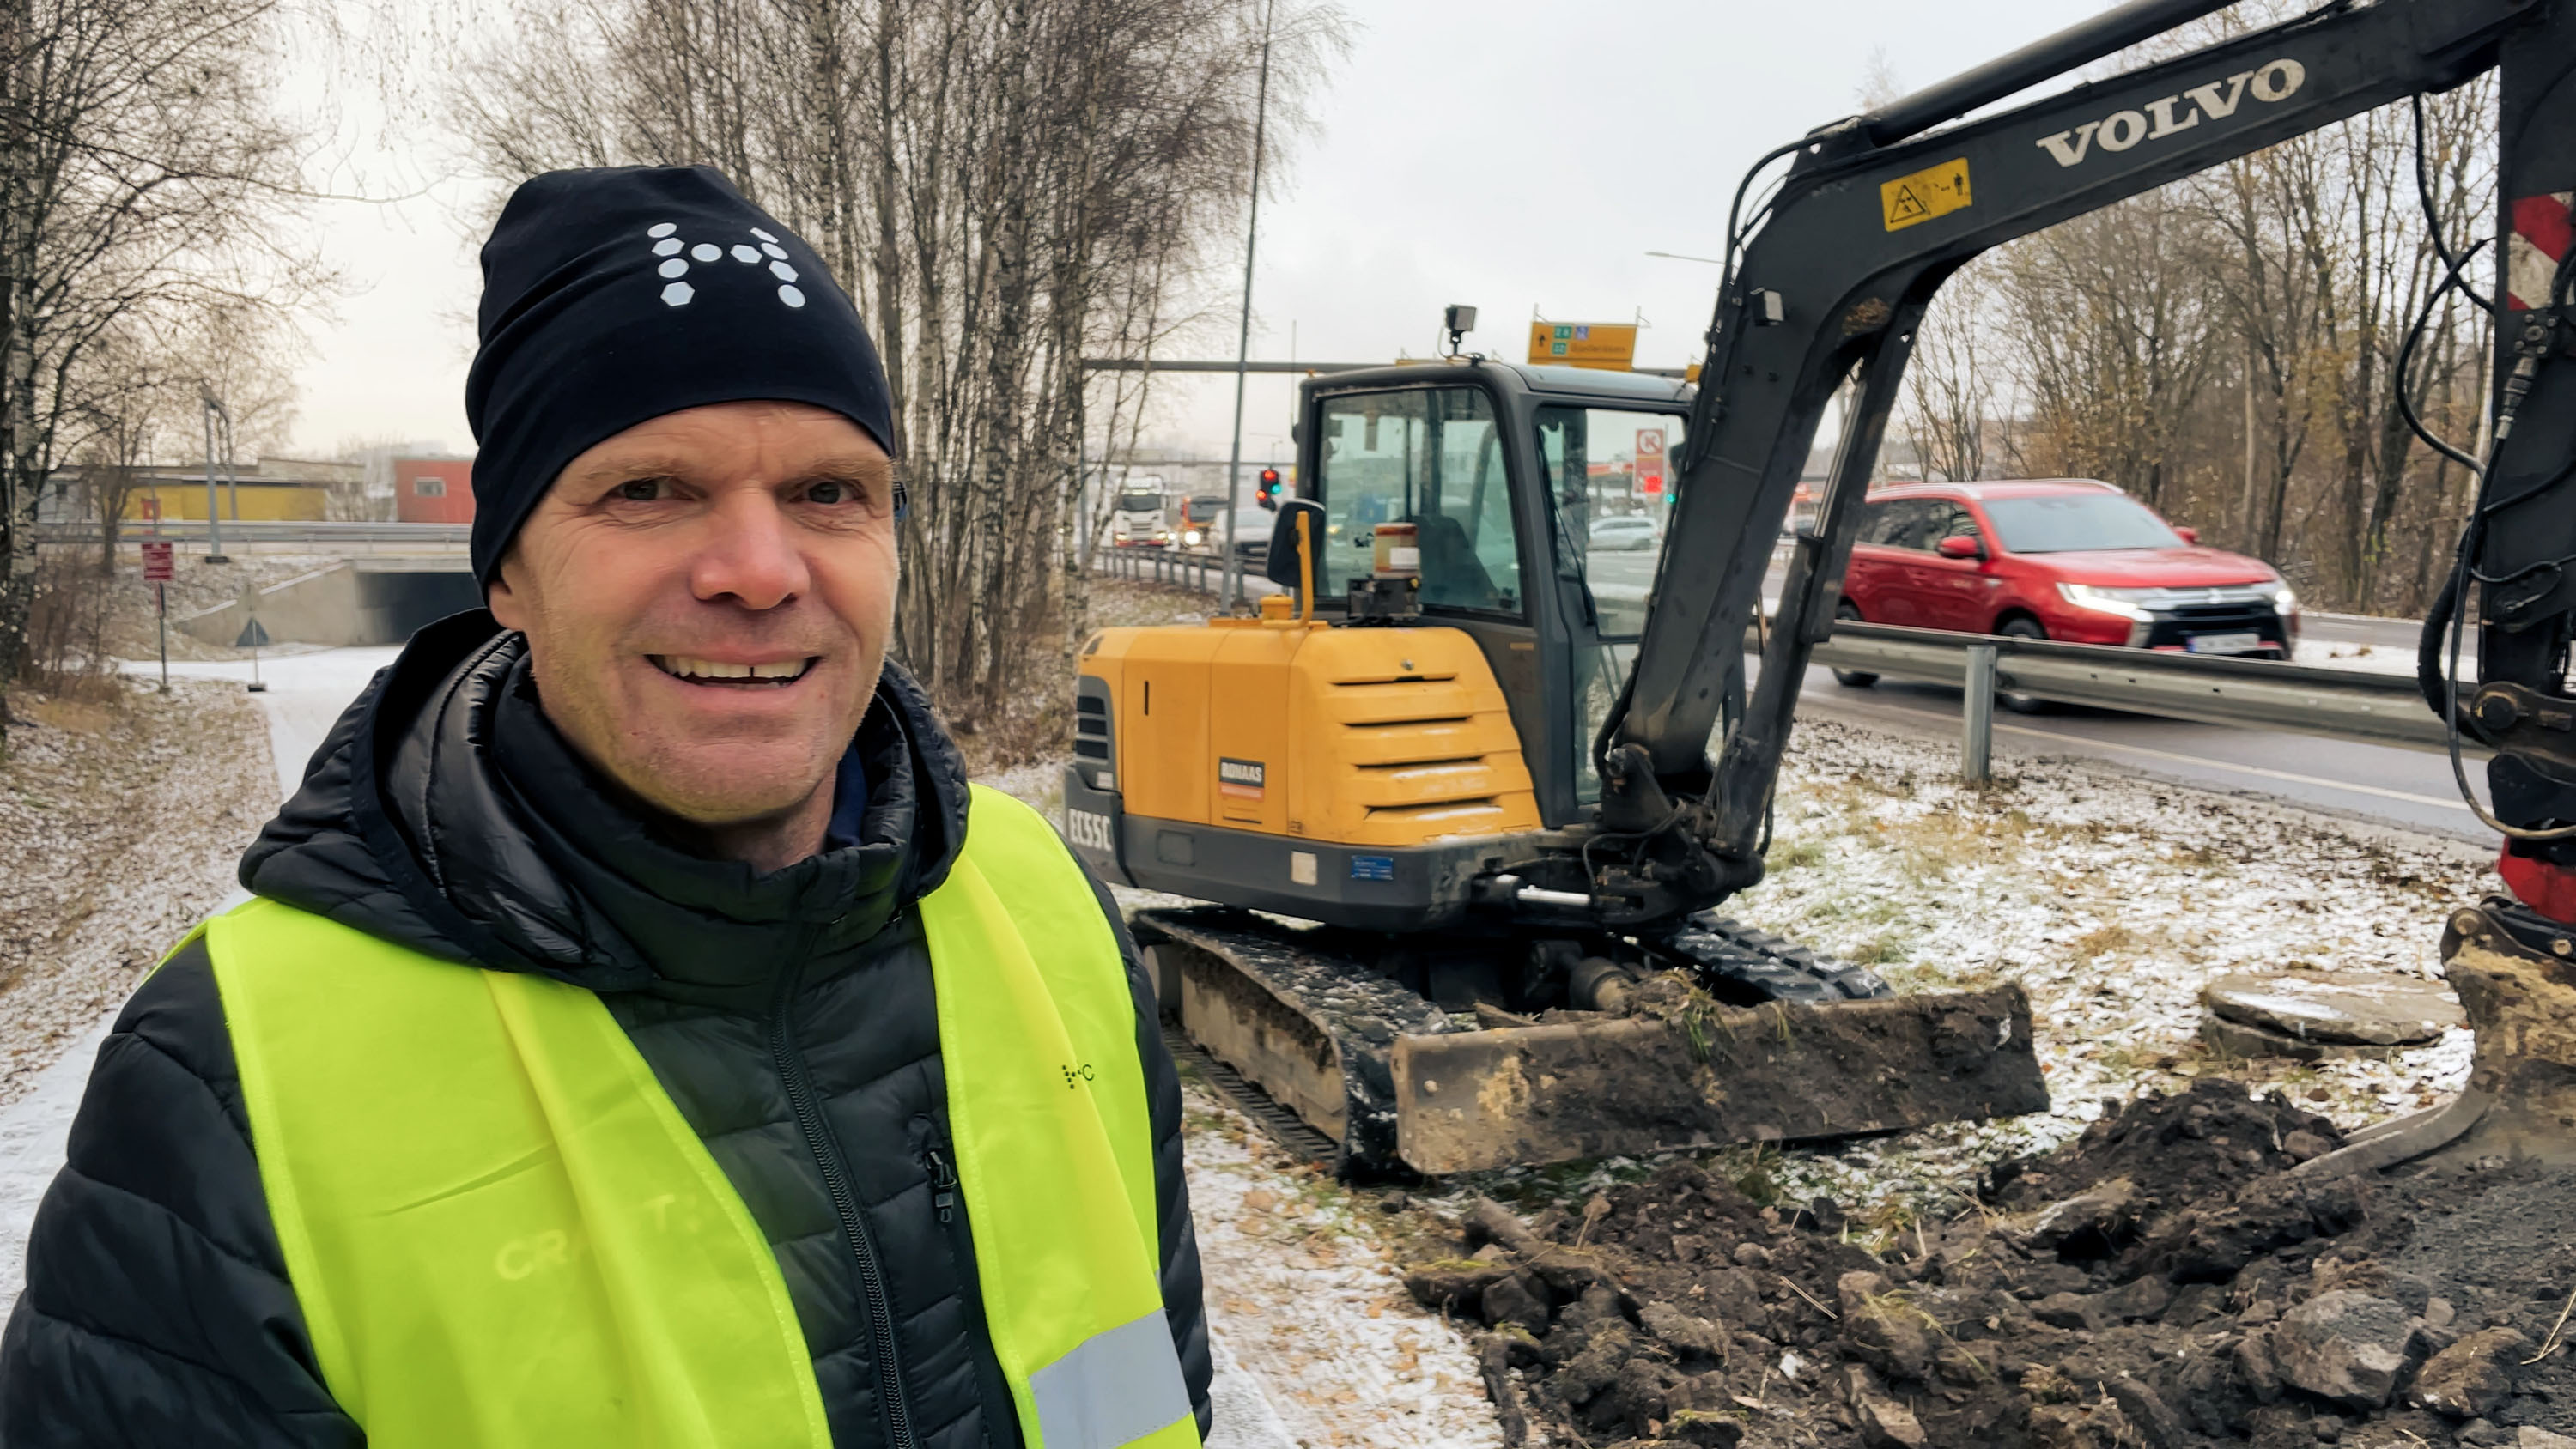 A person from Hexatronic Field Support in a high-visibility vest stands near a Volvo excavator on a snowy, muddy construction site in Norway. 